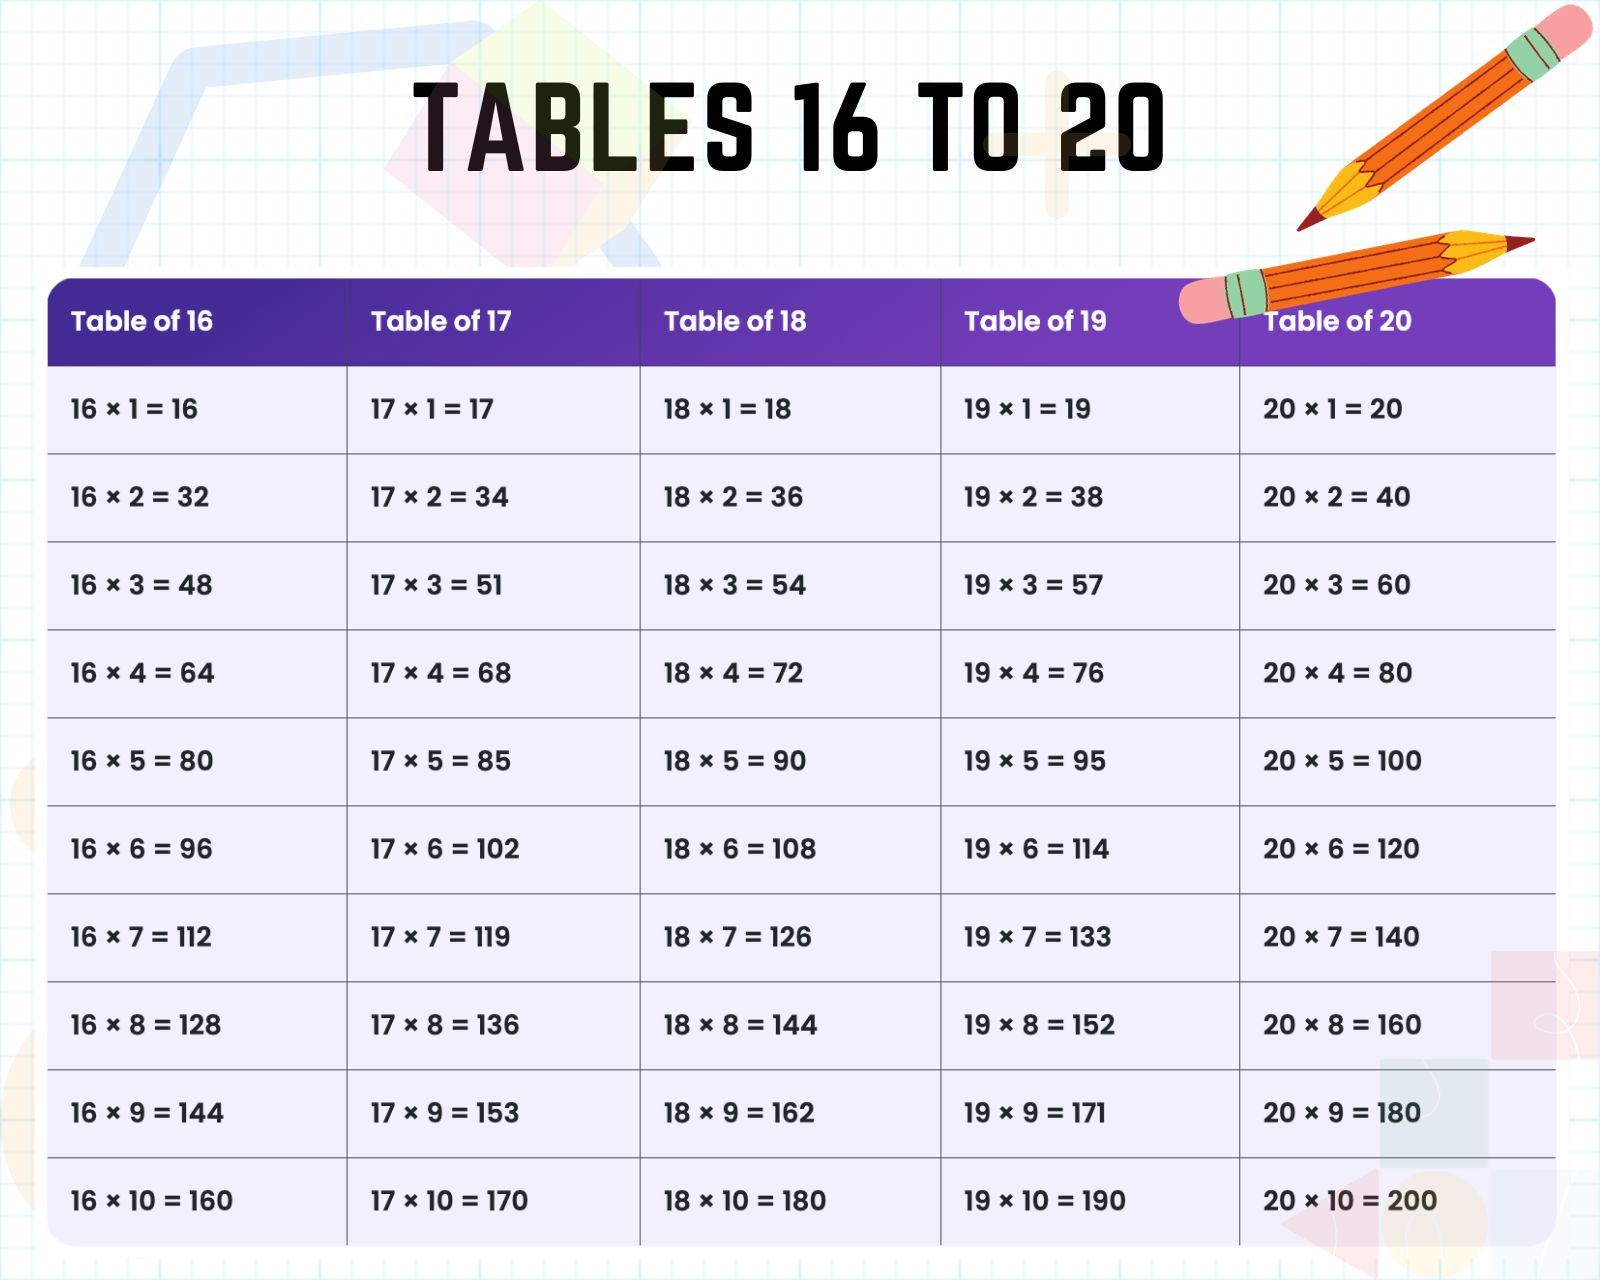 Tables 16 to 20 HD image